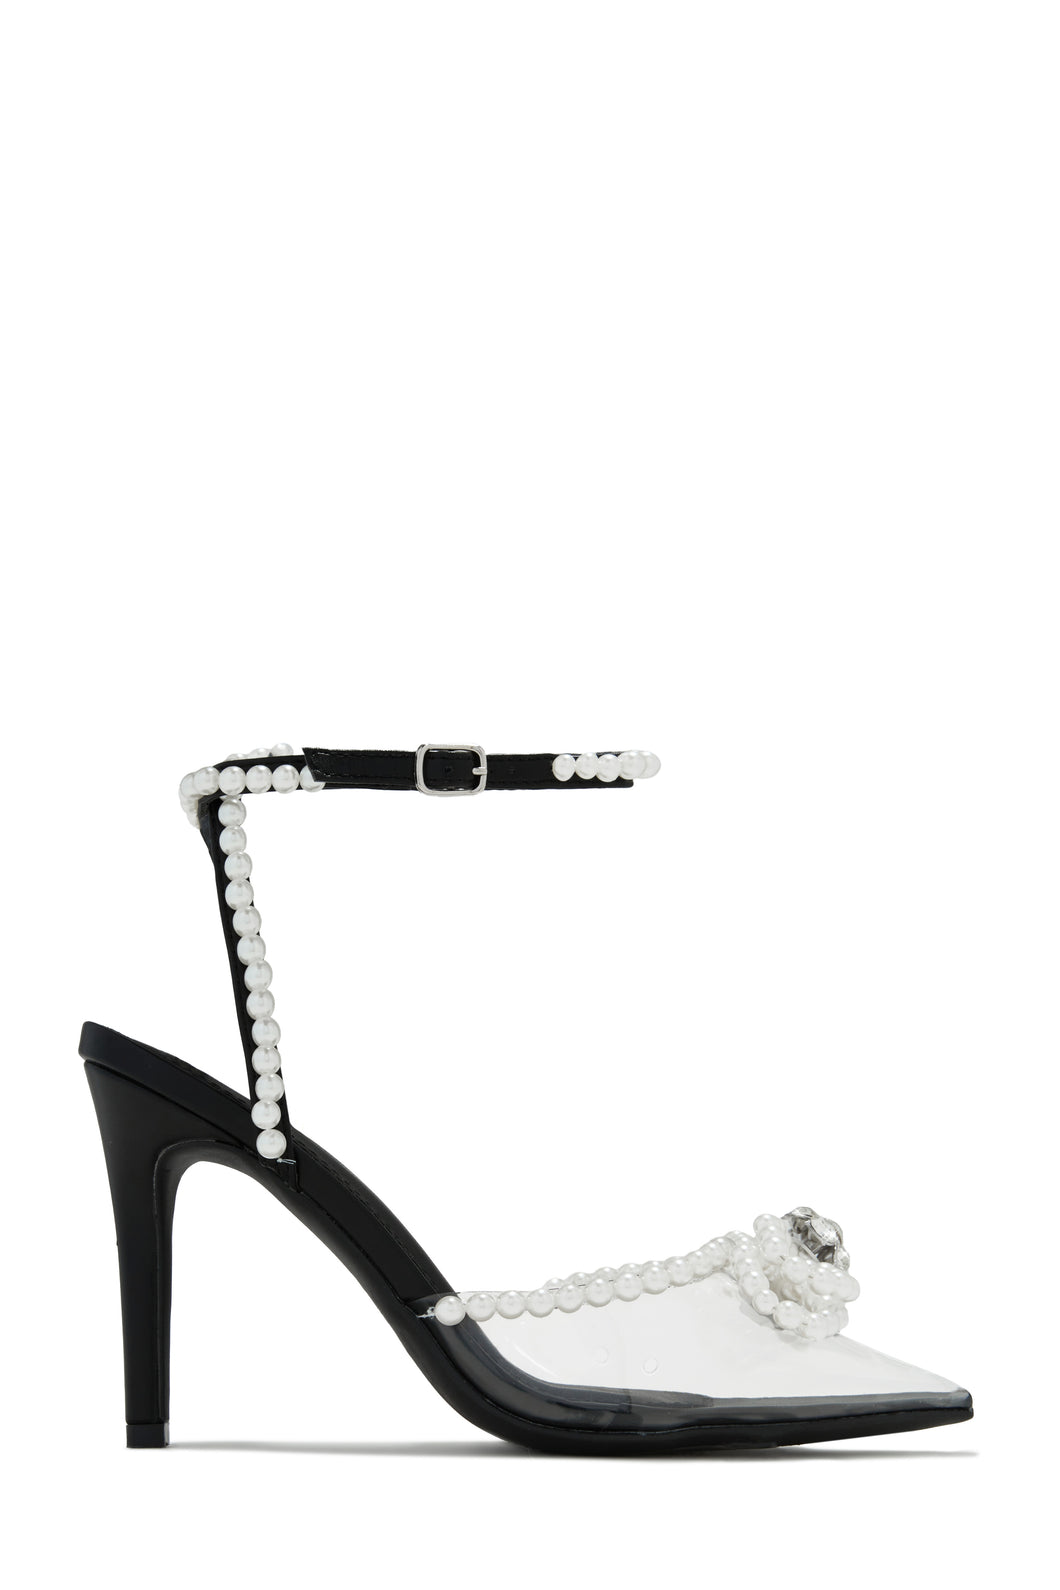 Black Pointed Toe Clear Heel Pumps with Faux Pearl Detailing